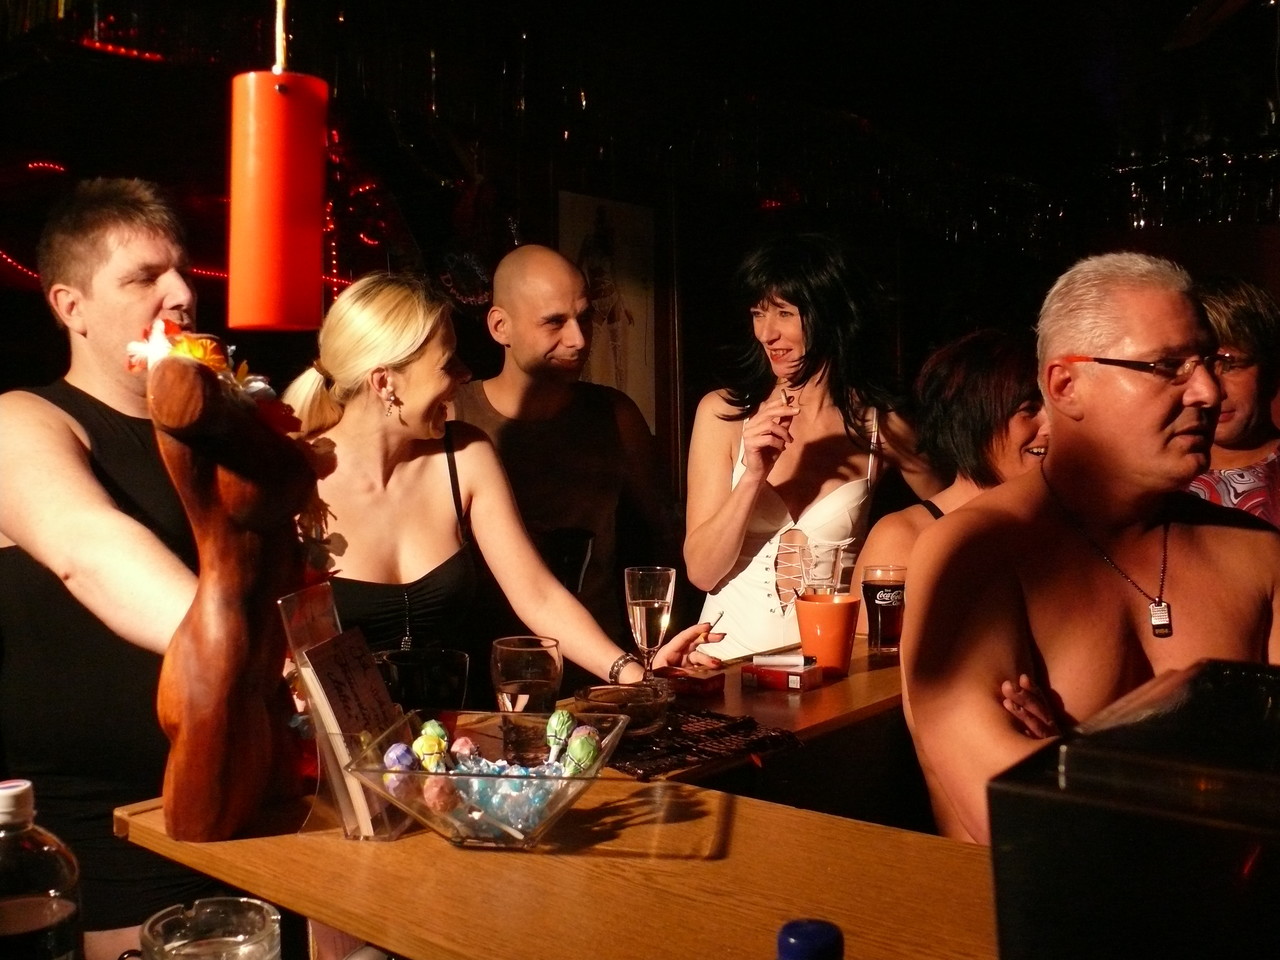 Open minded German swingers have an orgy after drinks have been consumed.